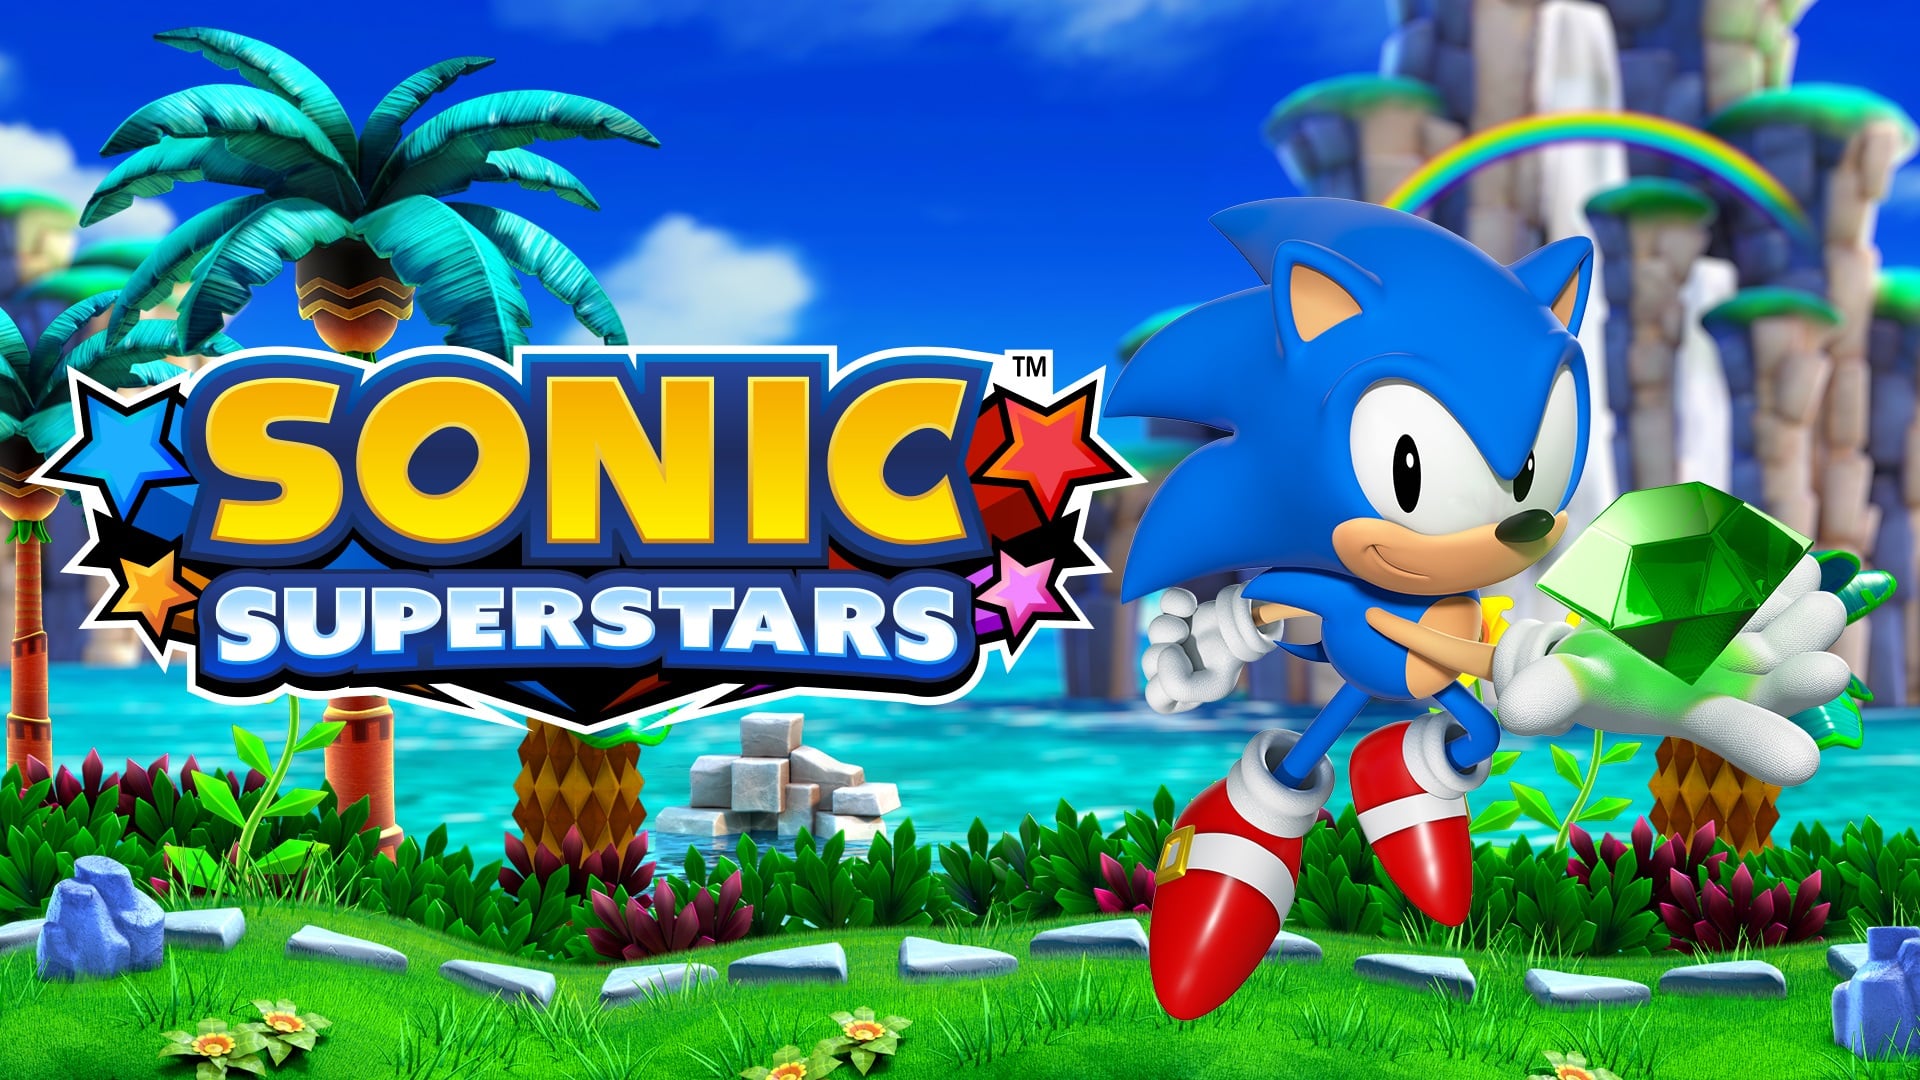 Some more news about the Sonic Superstars Digital Deluxe Content